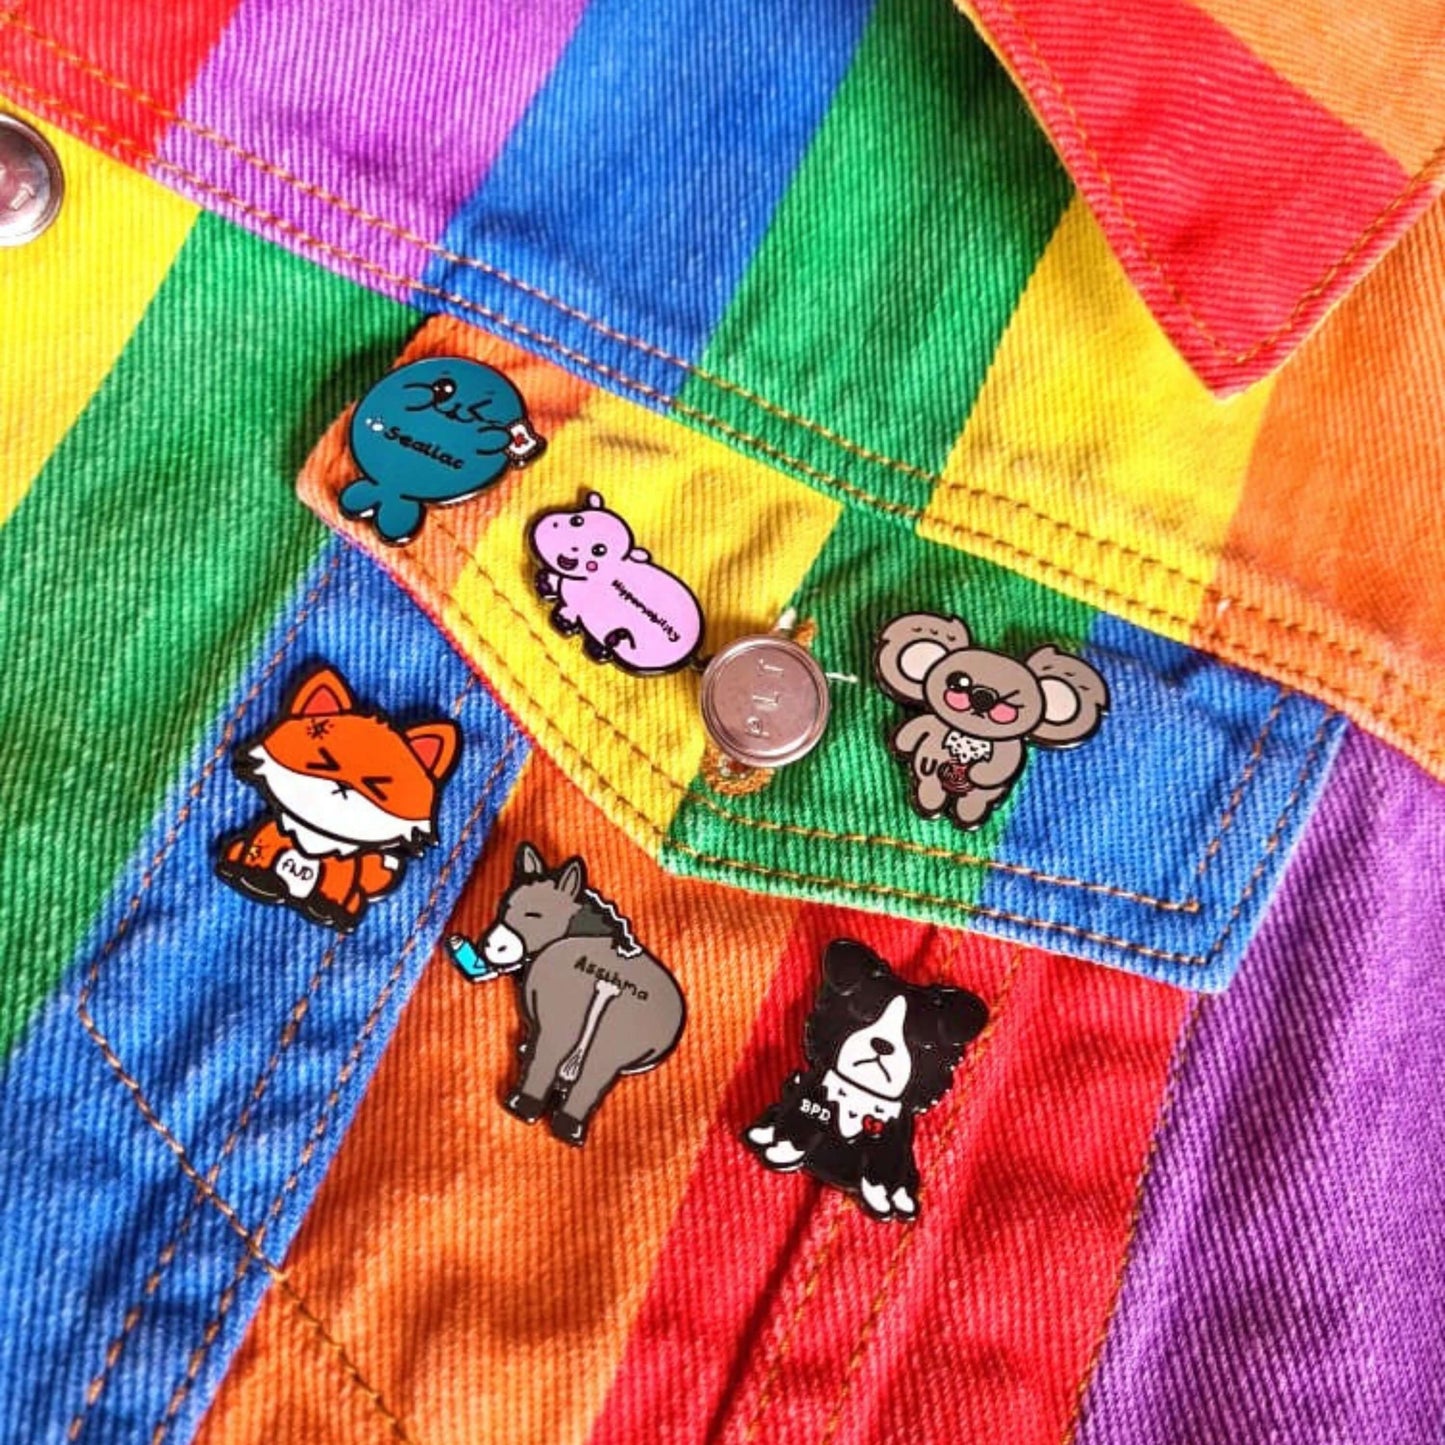 multiple Innabox enamel pins pinned onto a rainbow coloured jacket. The enamel pins are designed to raise awareness for chronic illnesses 